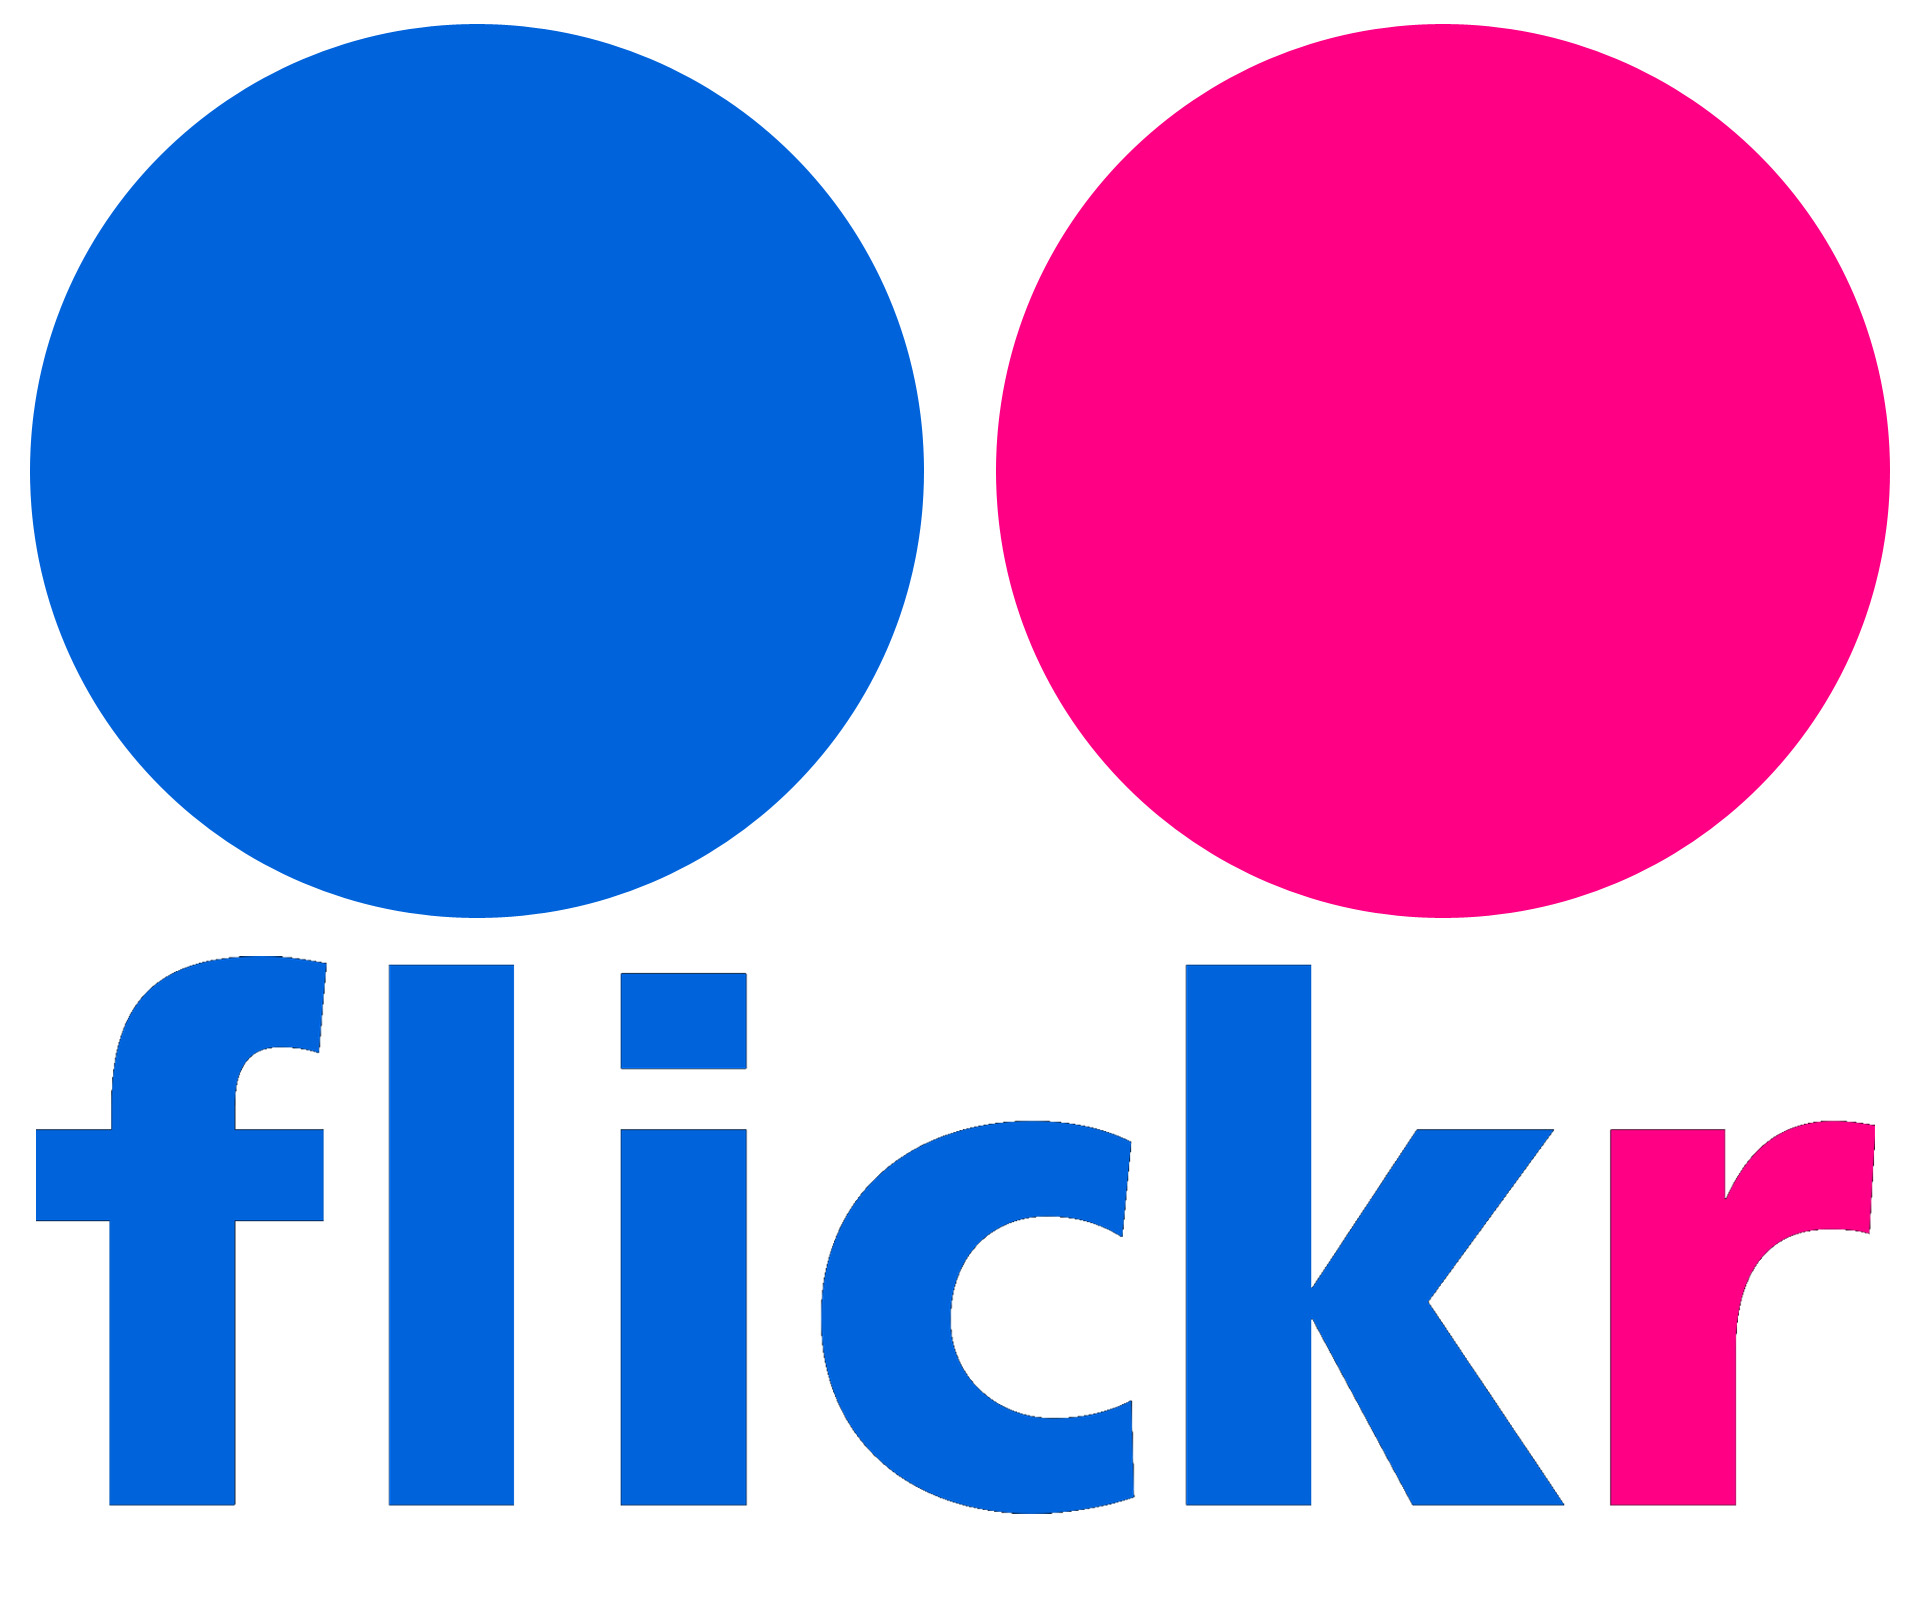 Flickr No longer 1 TB (1000 GB) of Storage for videos and pictures